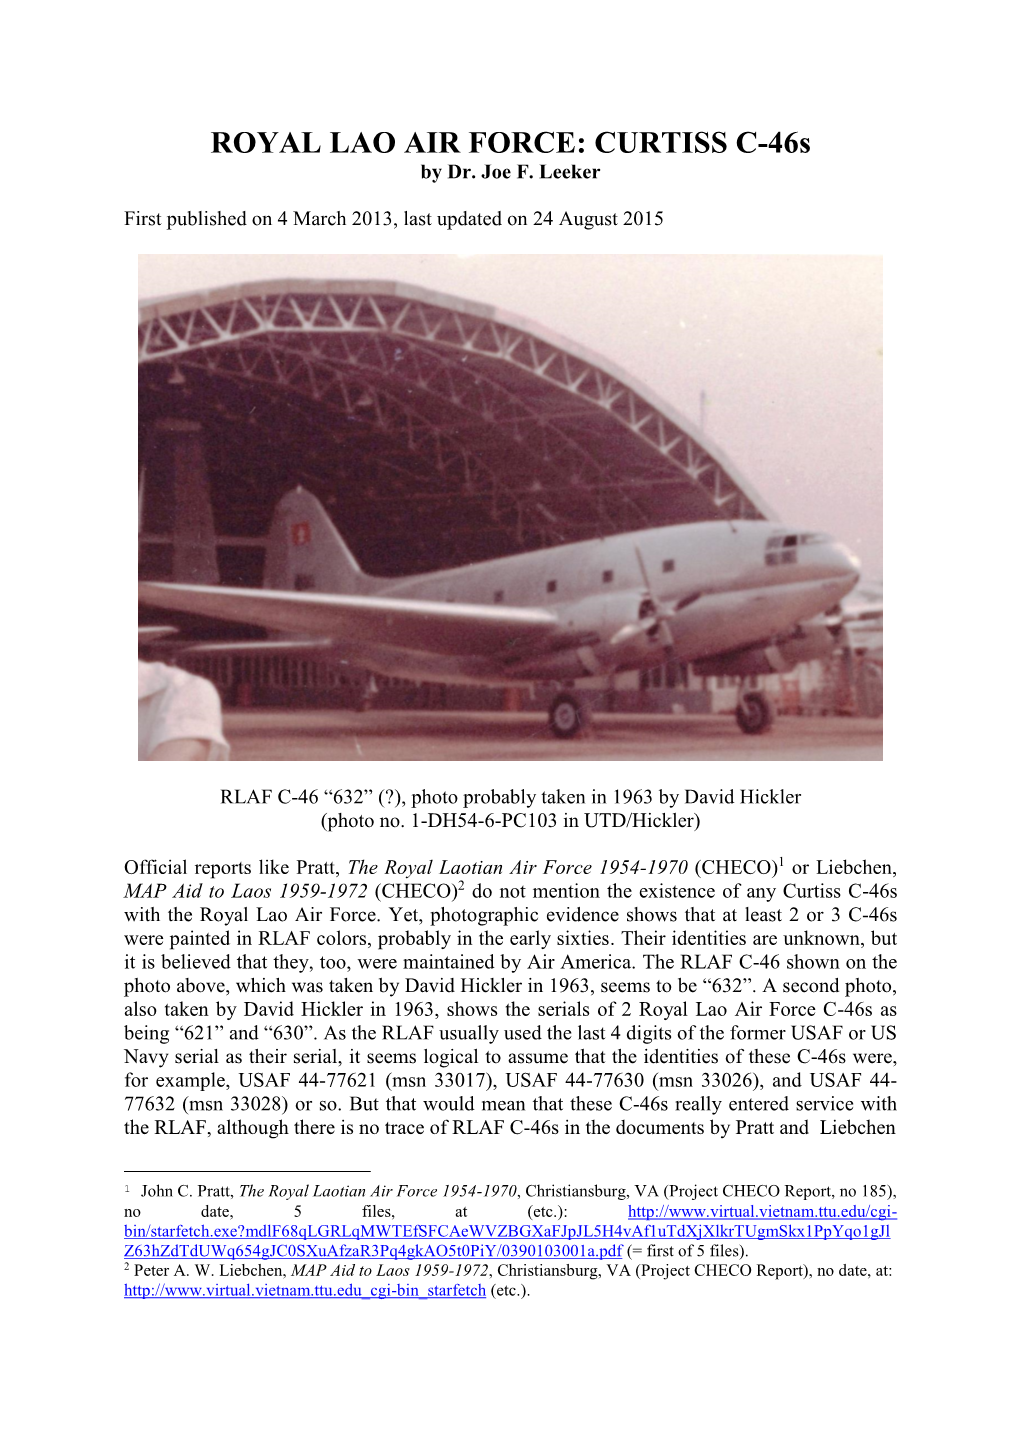 ROYAL LAO AIR FORCE: CURTISS C-46S by Dr